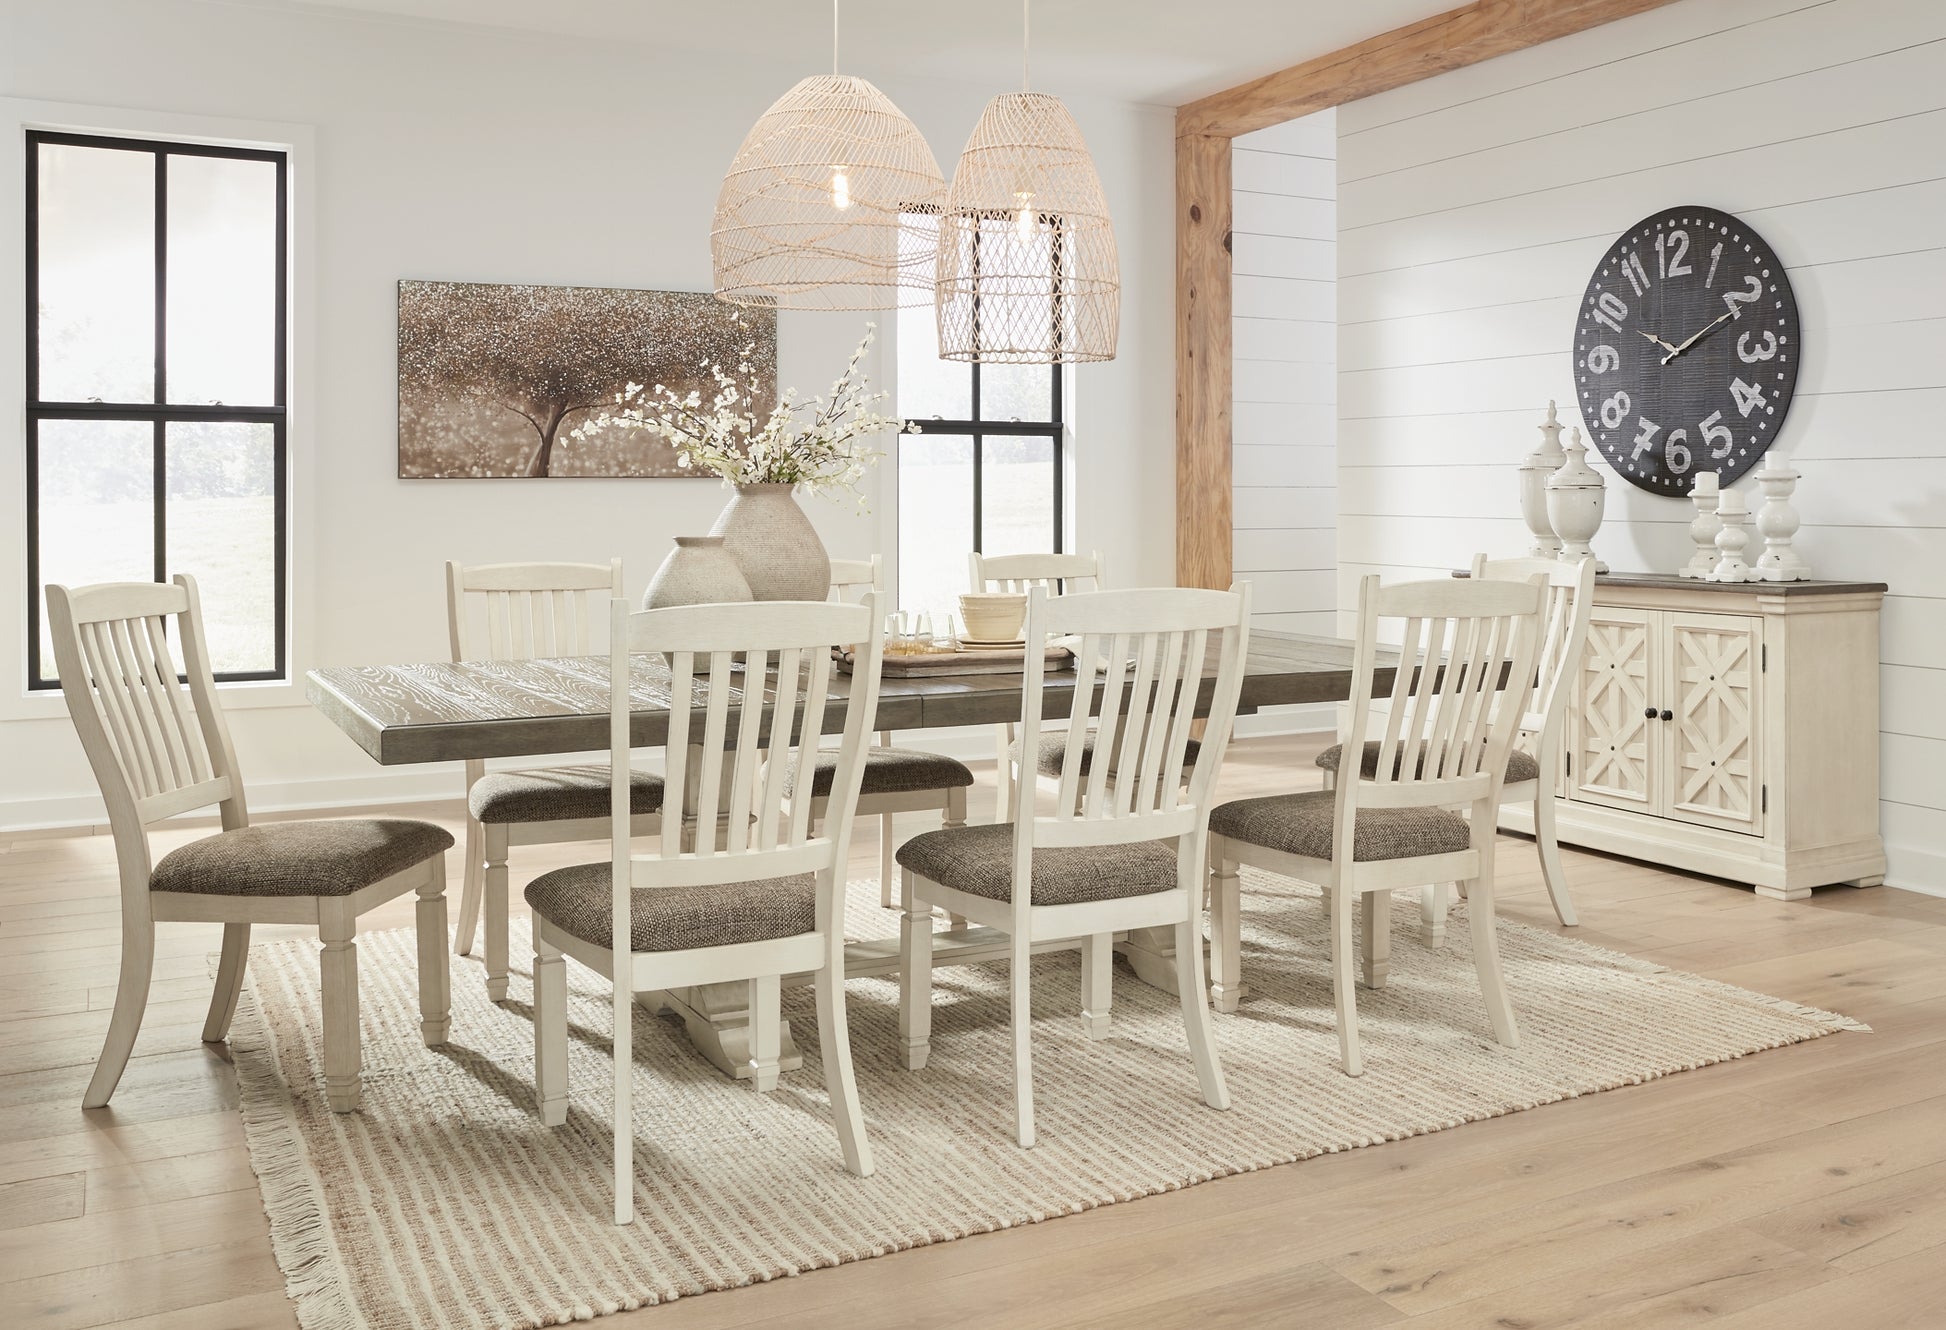 Bolanburg Dining Table and 8 Chairs with Storage JB's Furniture  Home Furniture, Home Decor, Furniture Store